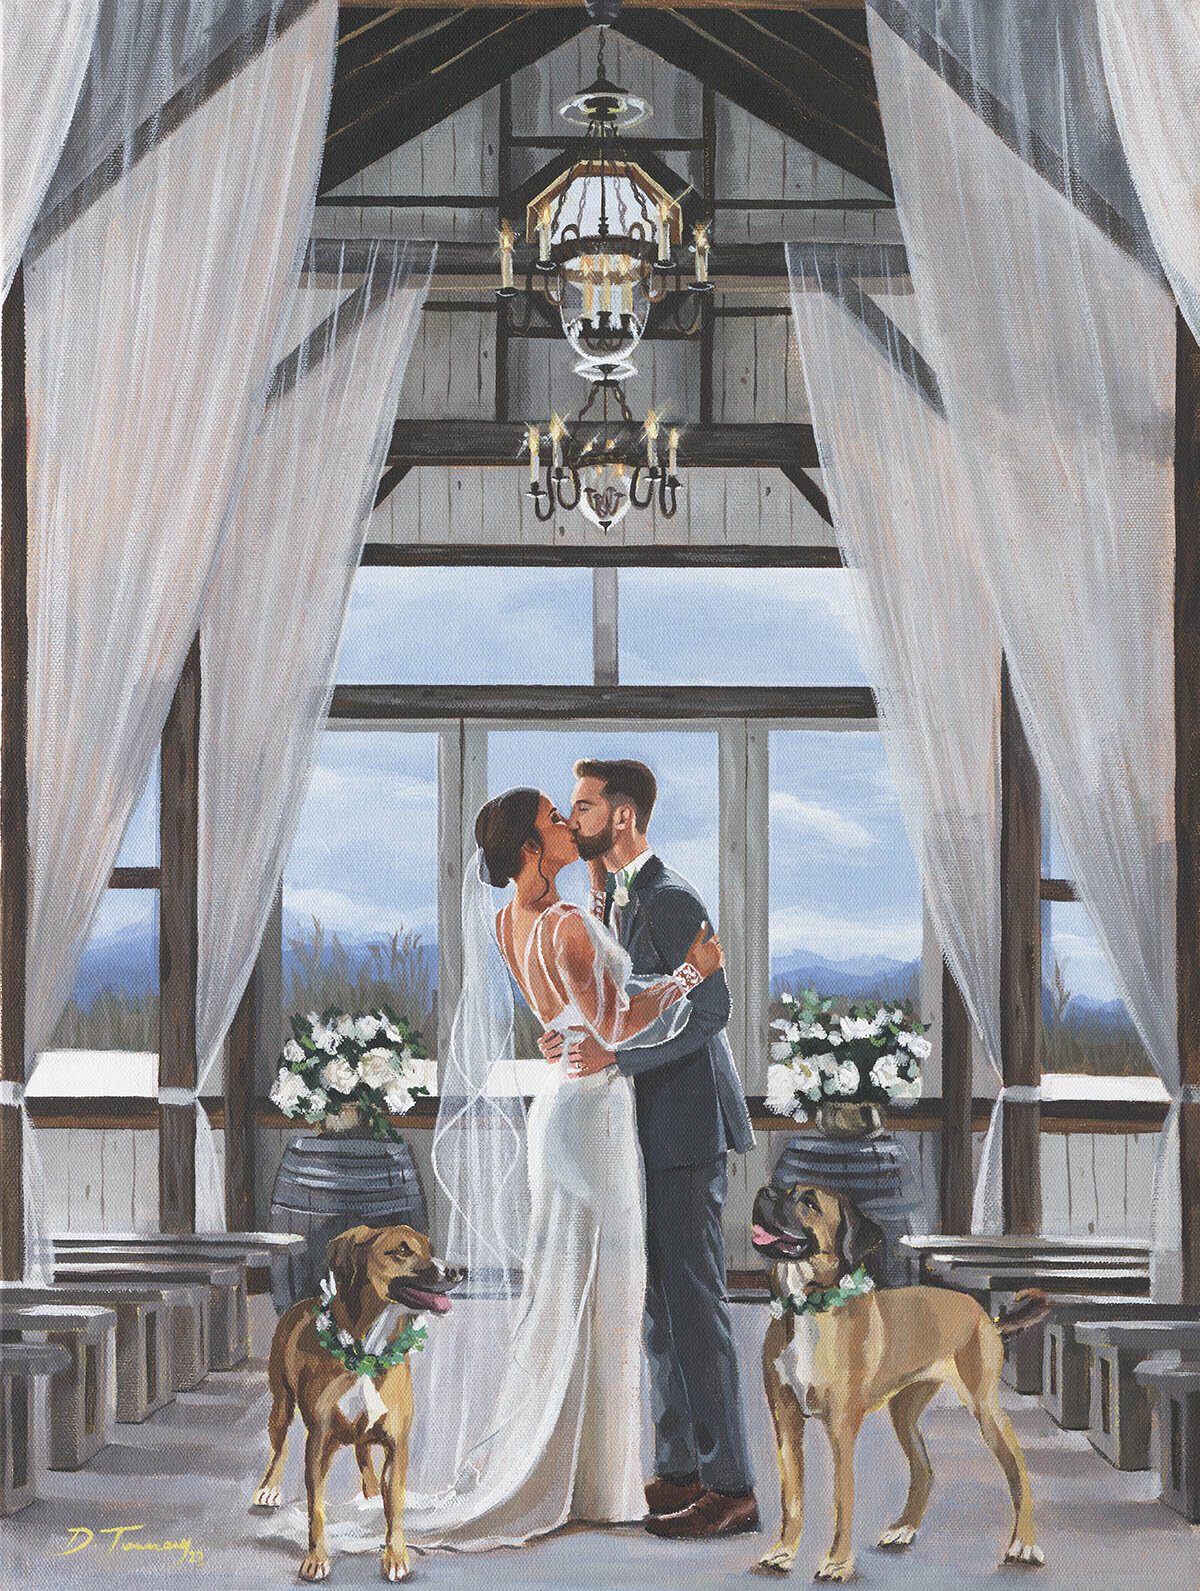 Couple kissing in a wedding venue